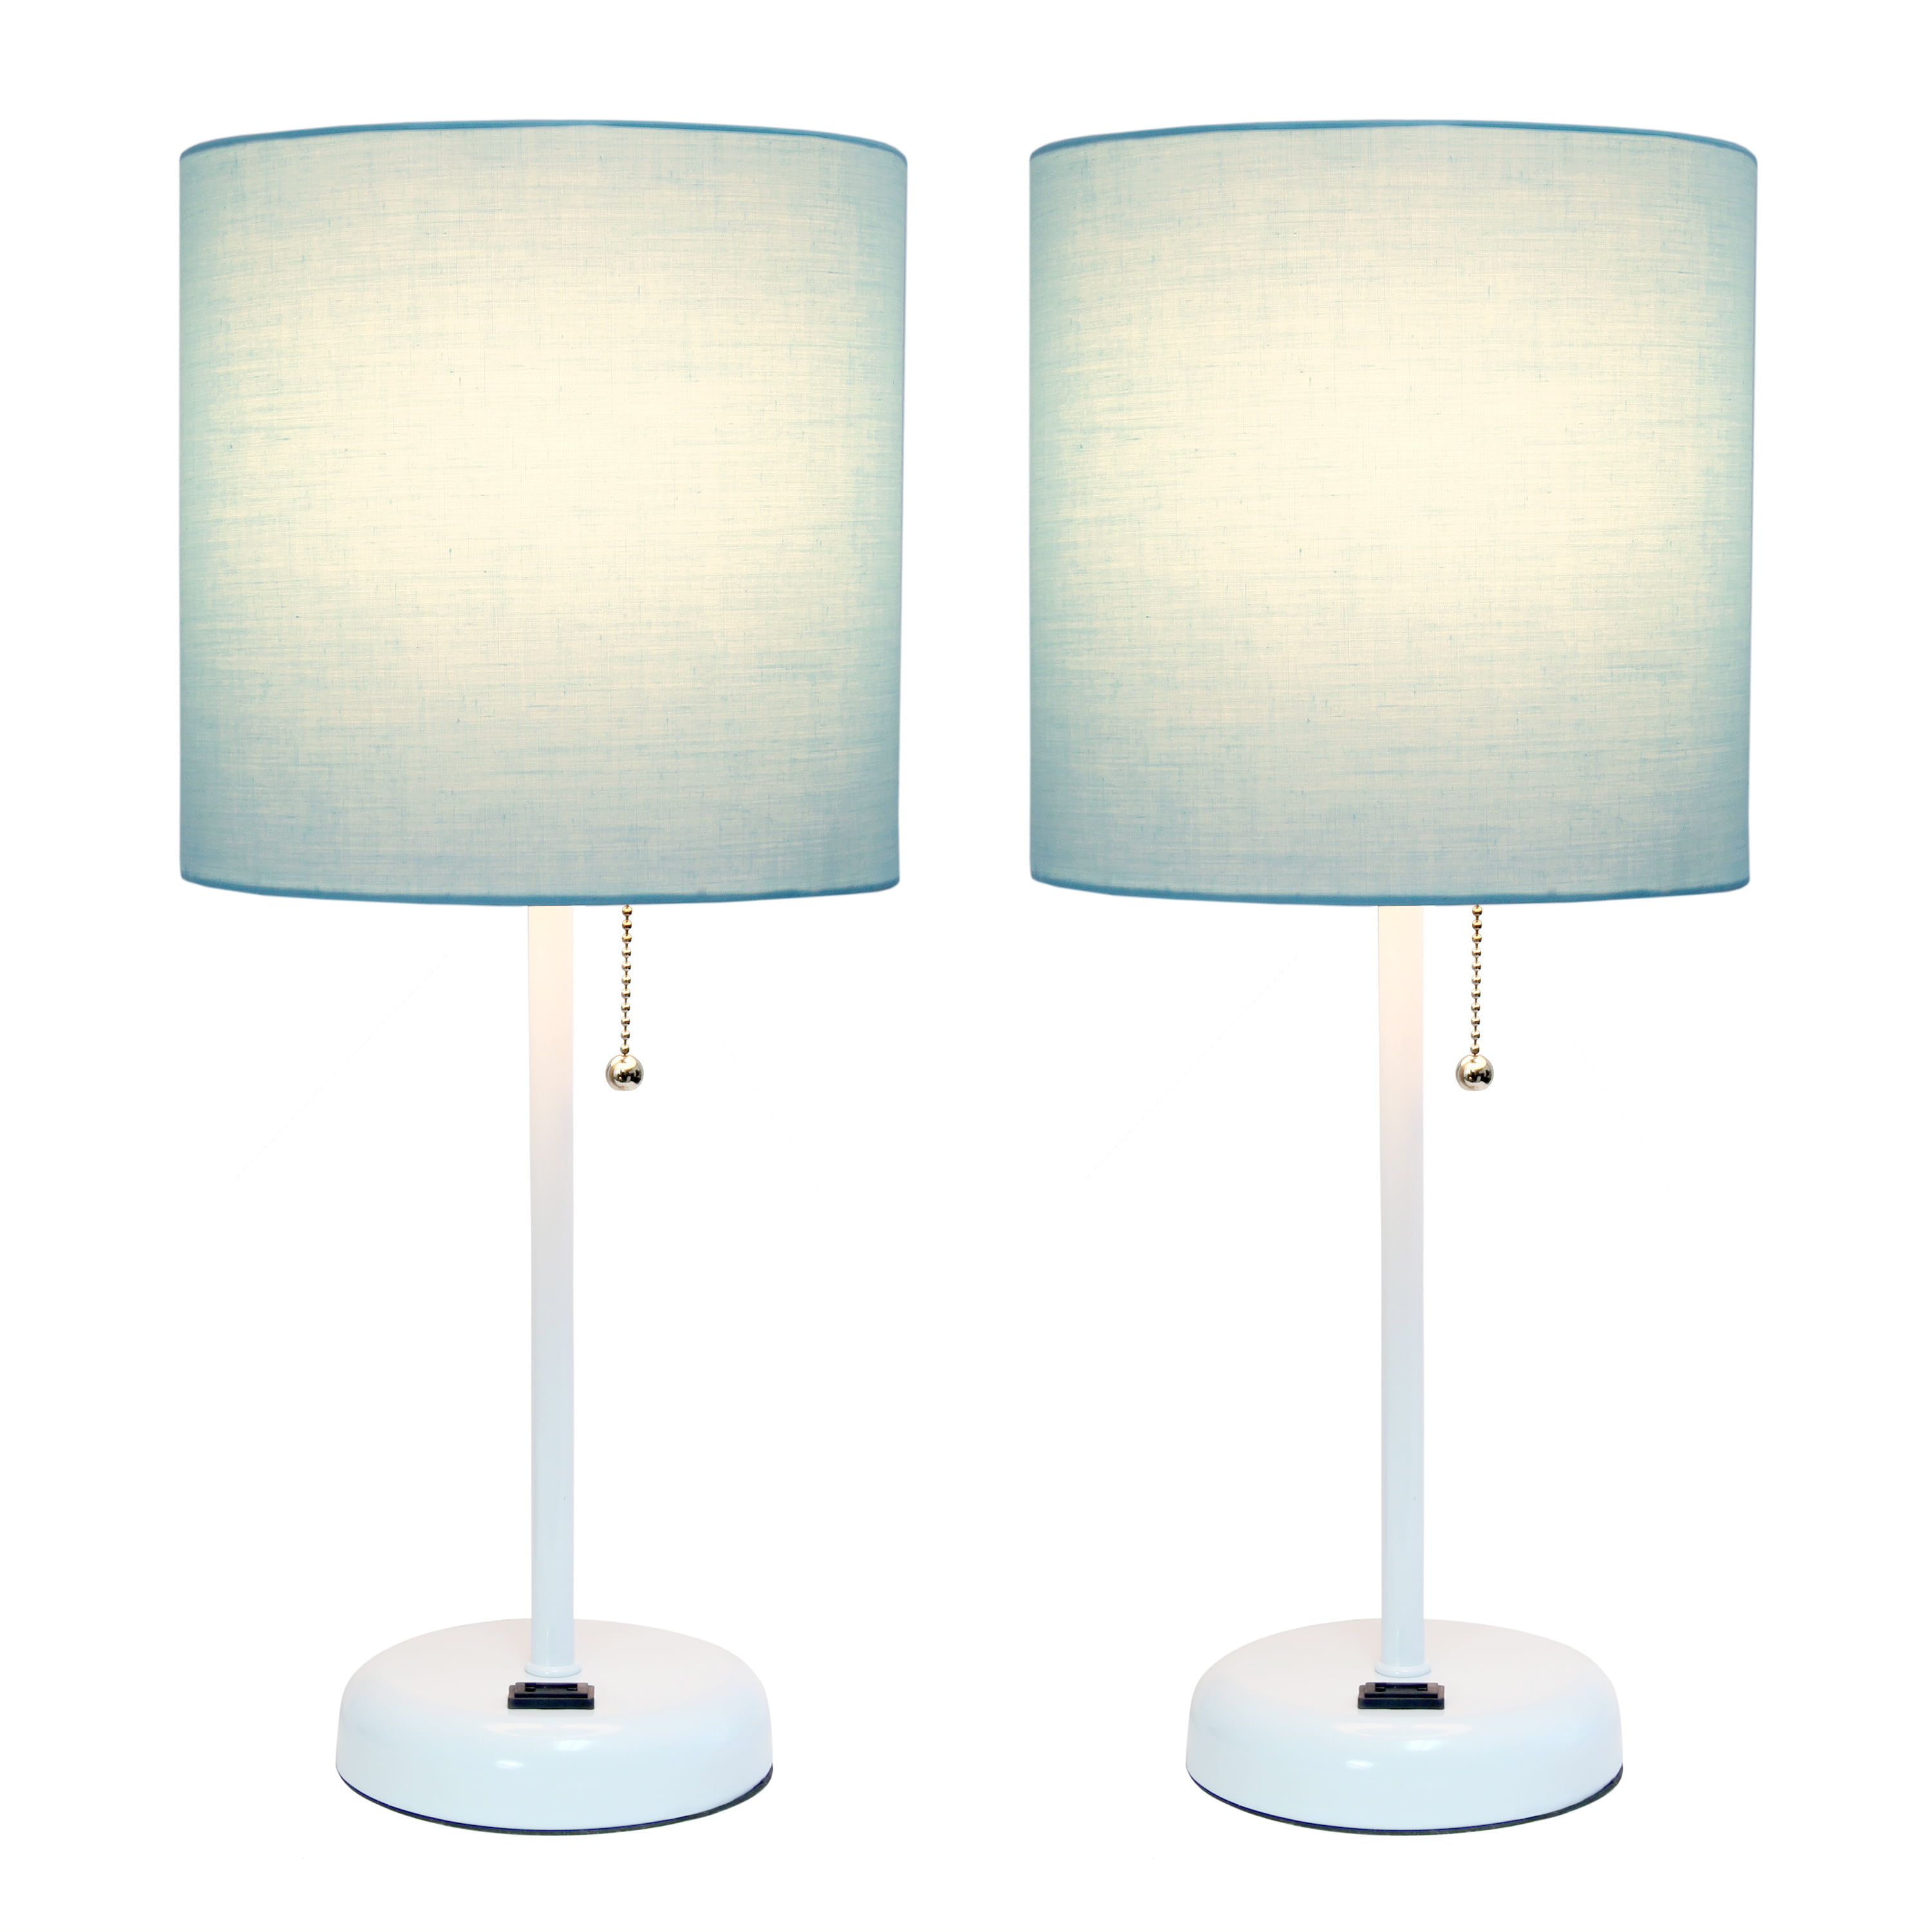 Limelights LC2001-AOW-2PK White Stick Charging Outlet and Aqua Fabric Shade 2 Pack Table Lamp Set,